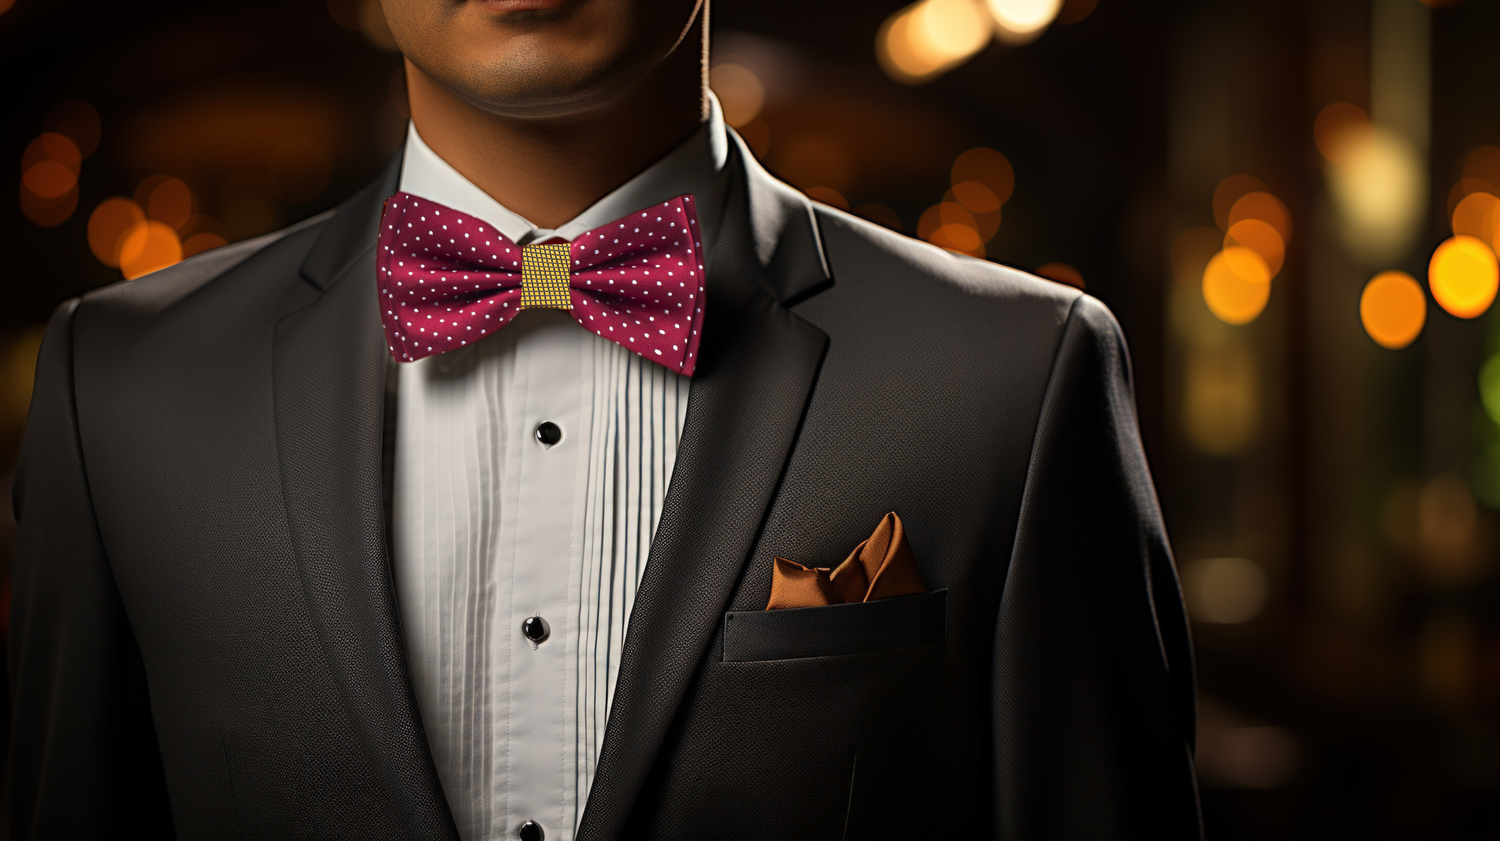 Man Wearing a Suit with Burgundy White Dot Bow Tie